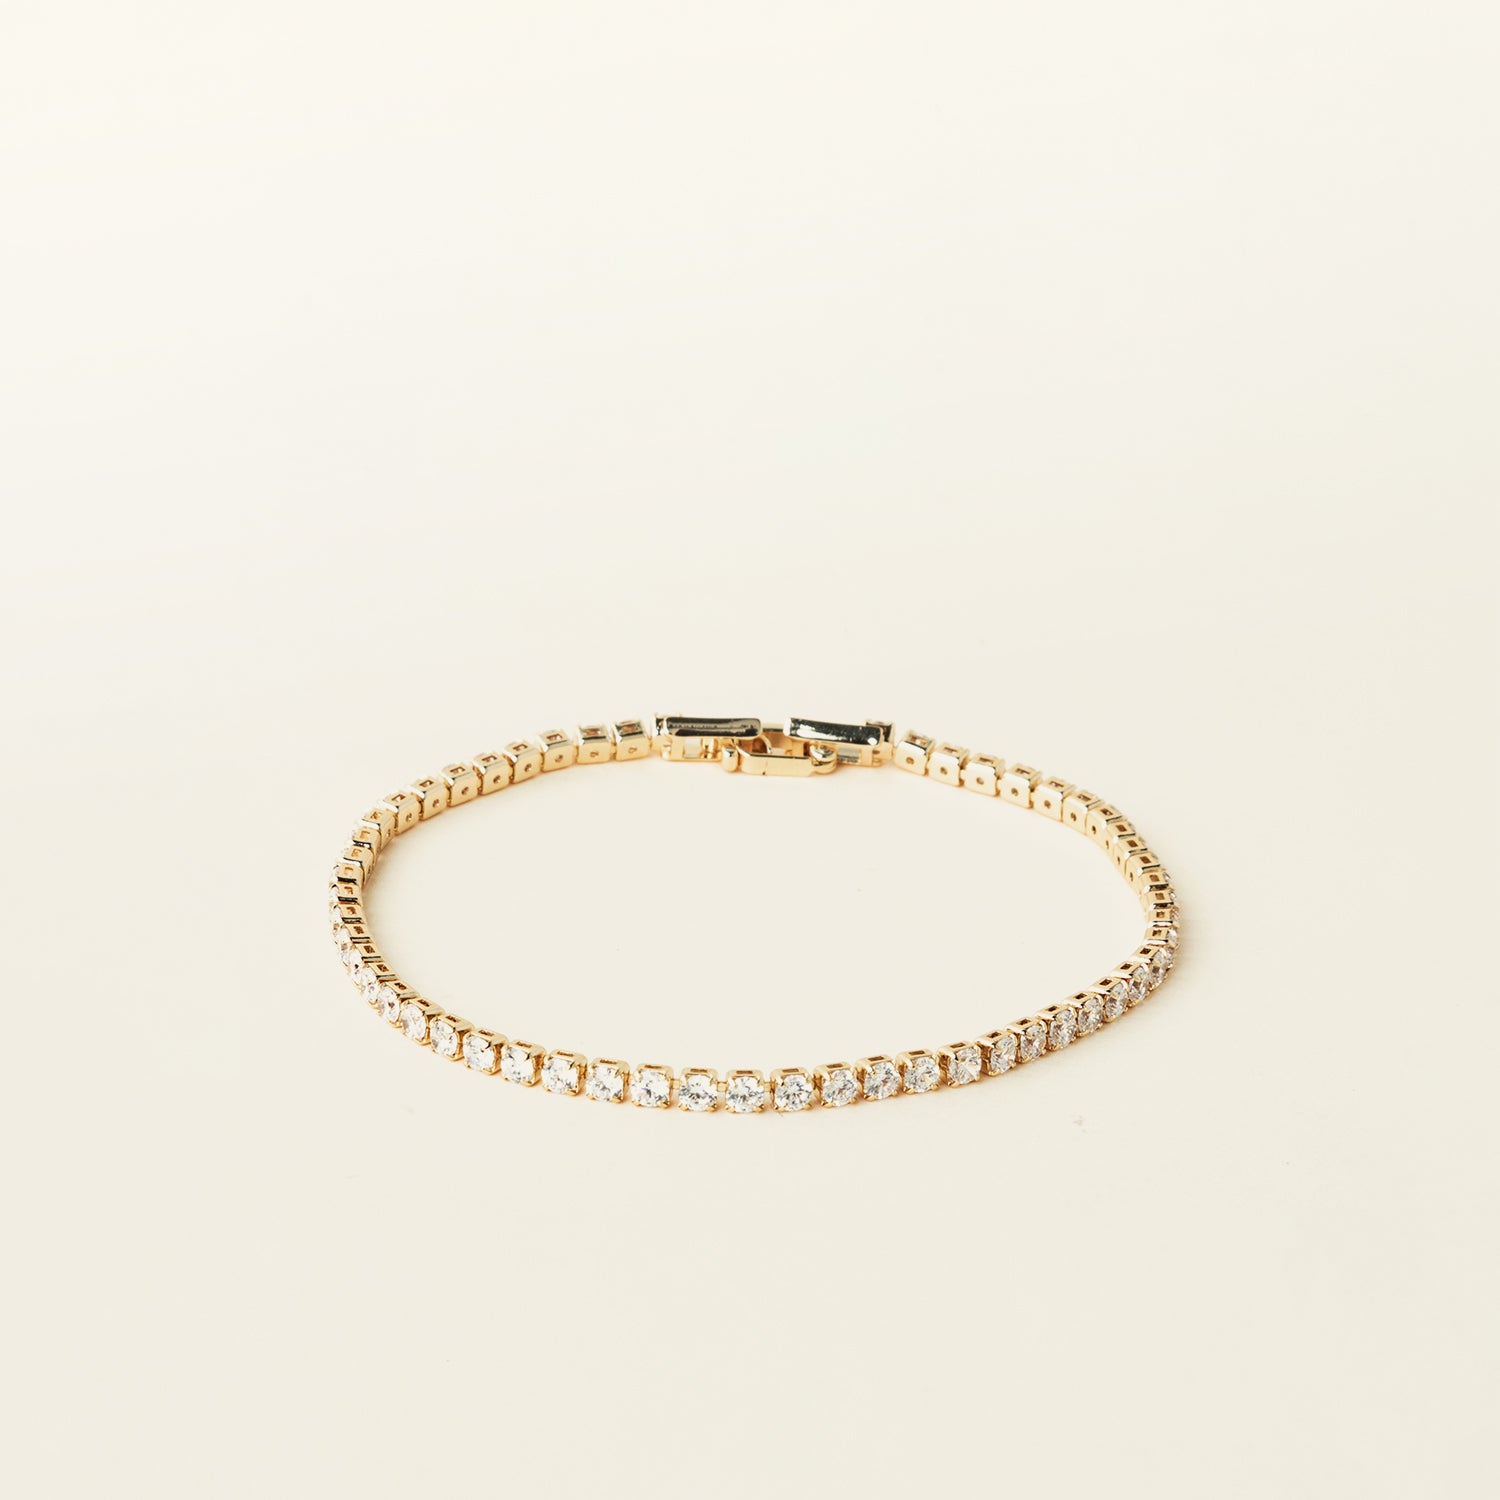 Image of the Tennis Bracelet is an exquisite companion to its sister piece, the Classic Tennis Necklace. Meticulously constructed from 14K gold plated metal, it is embellished with shimmering Cubic Zirconia stones. Additionally, its design is exceptionally enduring - it is tarnish-resistant, water-resistant, nickel-free, and hypoallergenic.